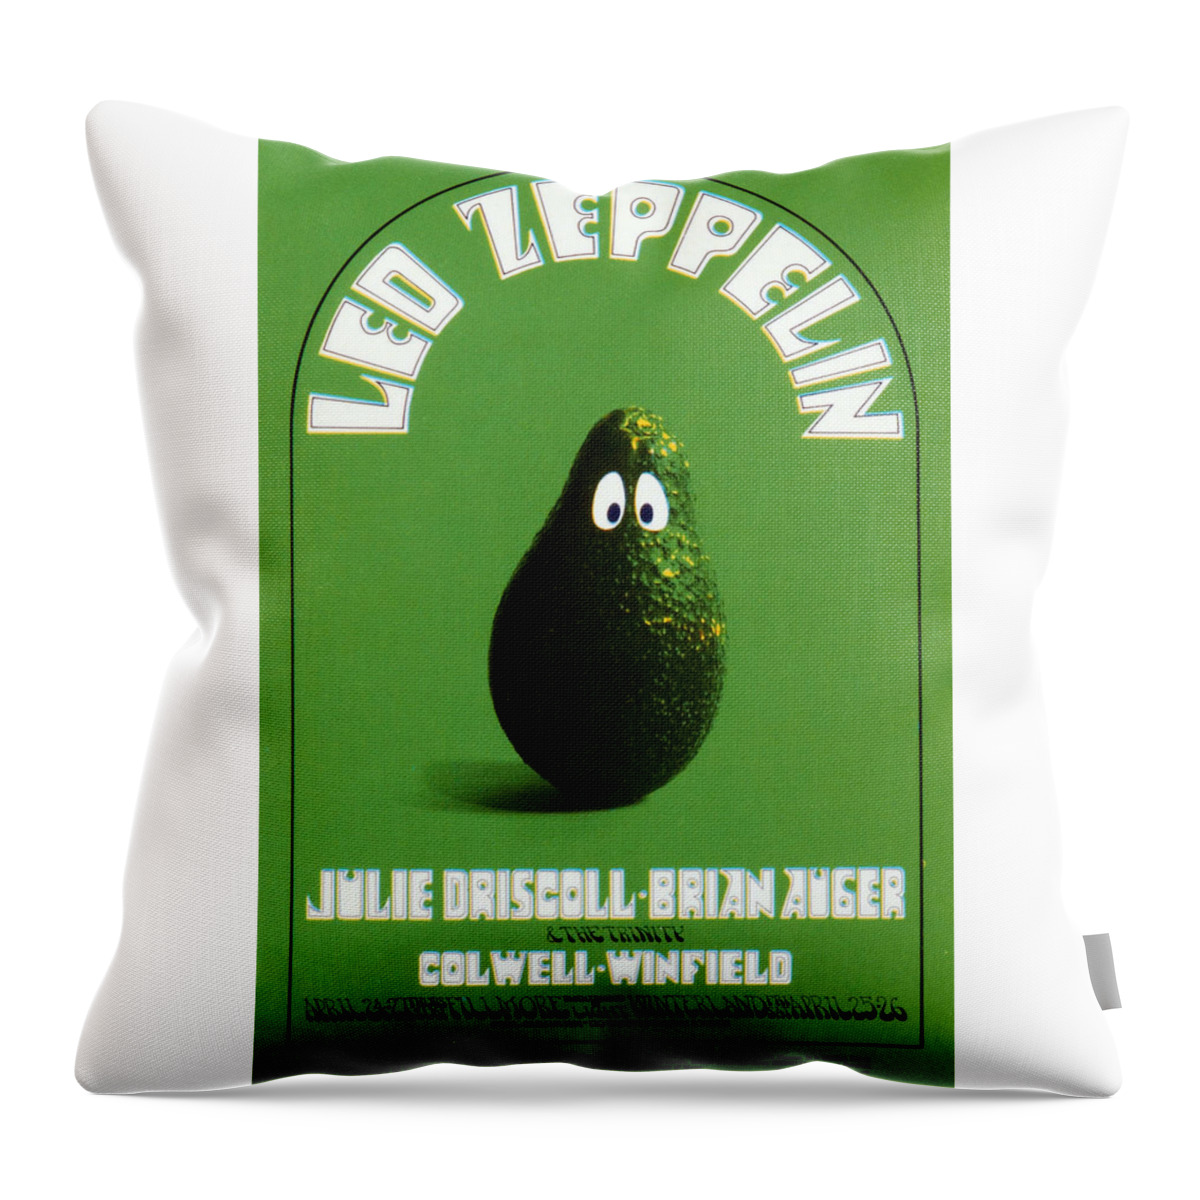 Led Zeppelin Throw Pillow featuring the painting Led Zeppelin by Led Zeppelin